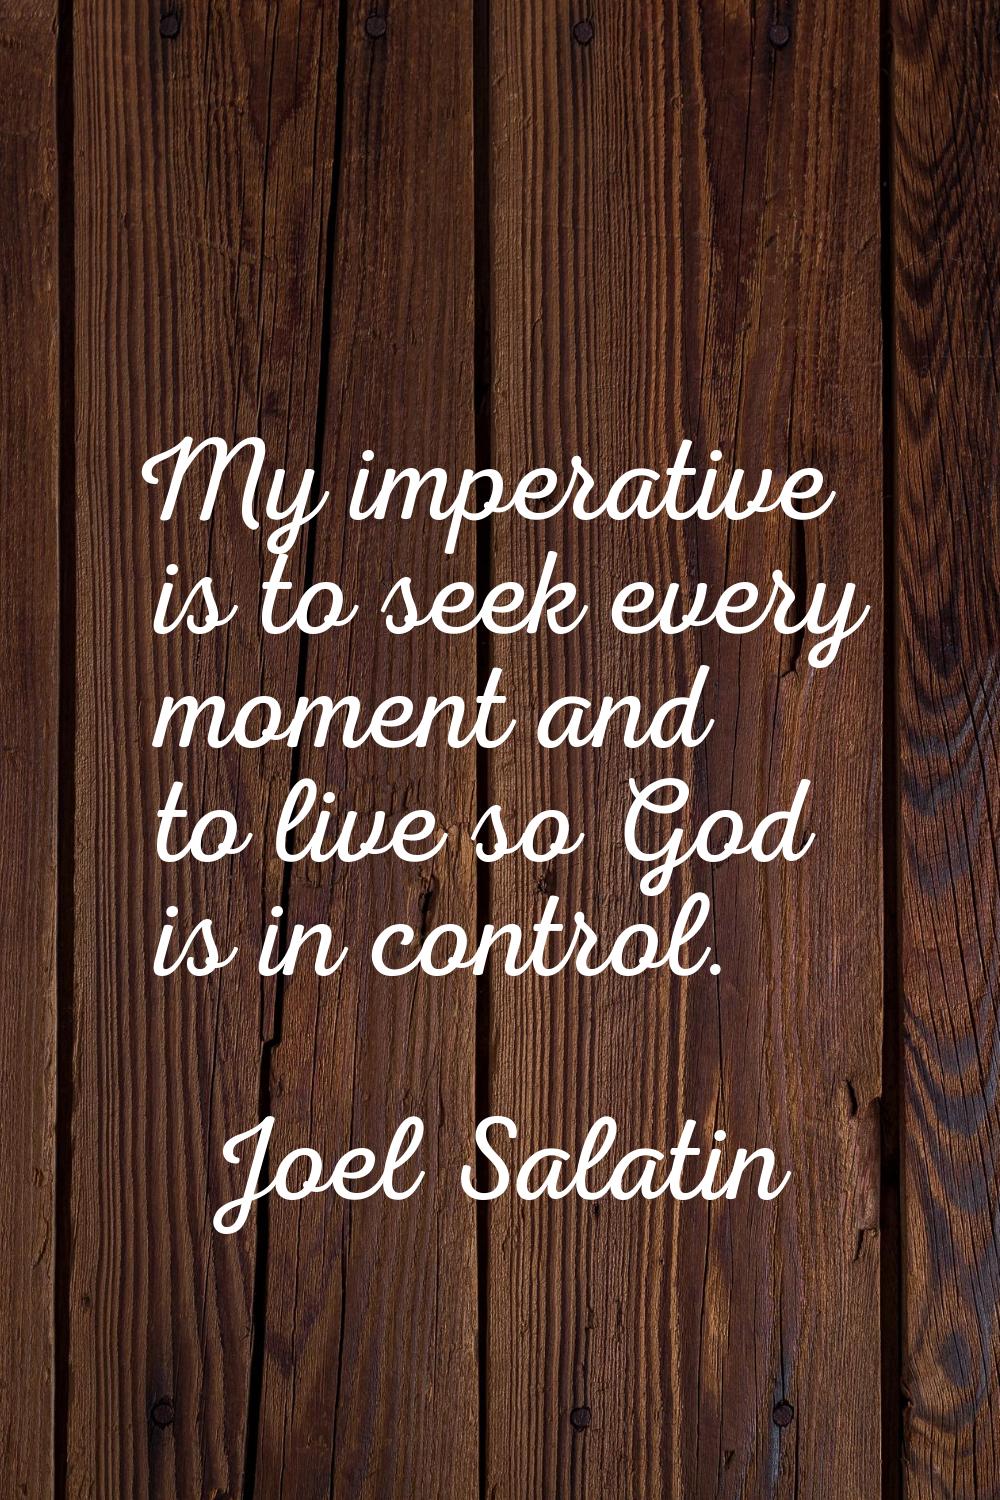 My imperative is to seek every moment and to live so God is in control.